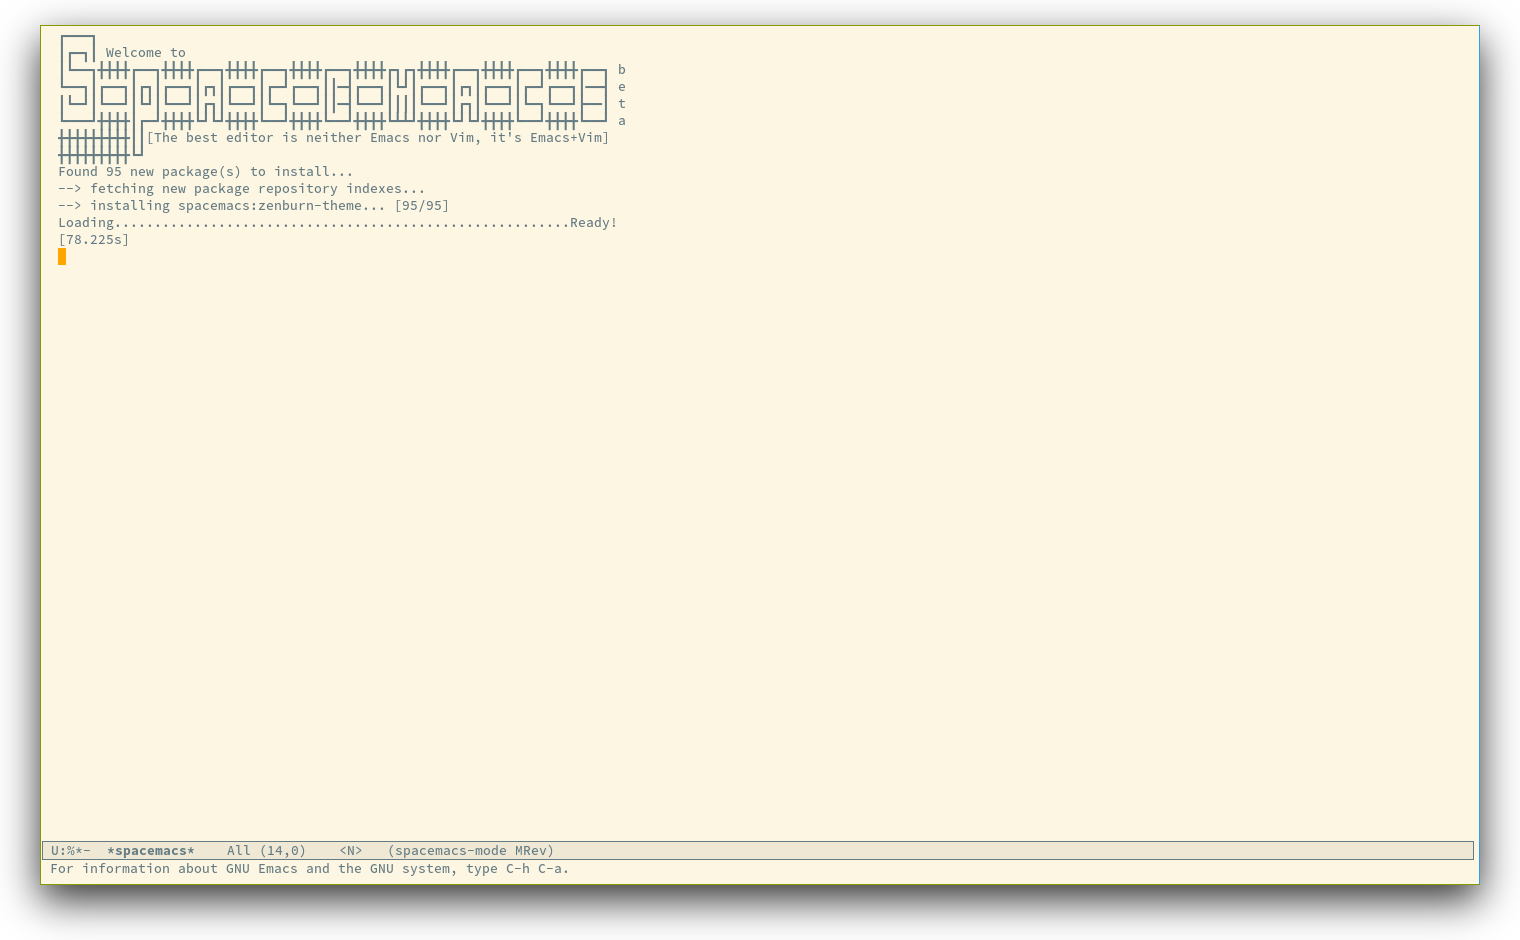 /TakeV/spacemacs/media/commit/5895e0e45fd1f2e85ee64403d3f2ca025711d91d/doc/img/spacemacs-startup.png